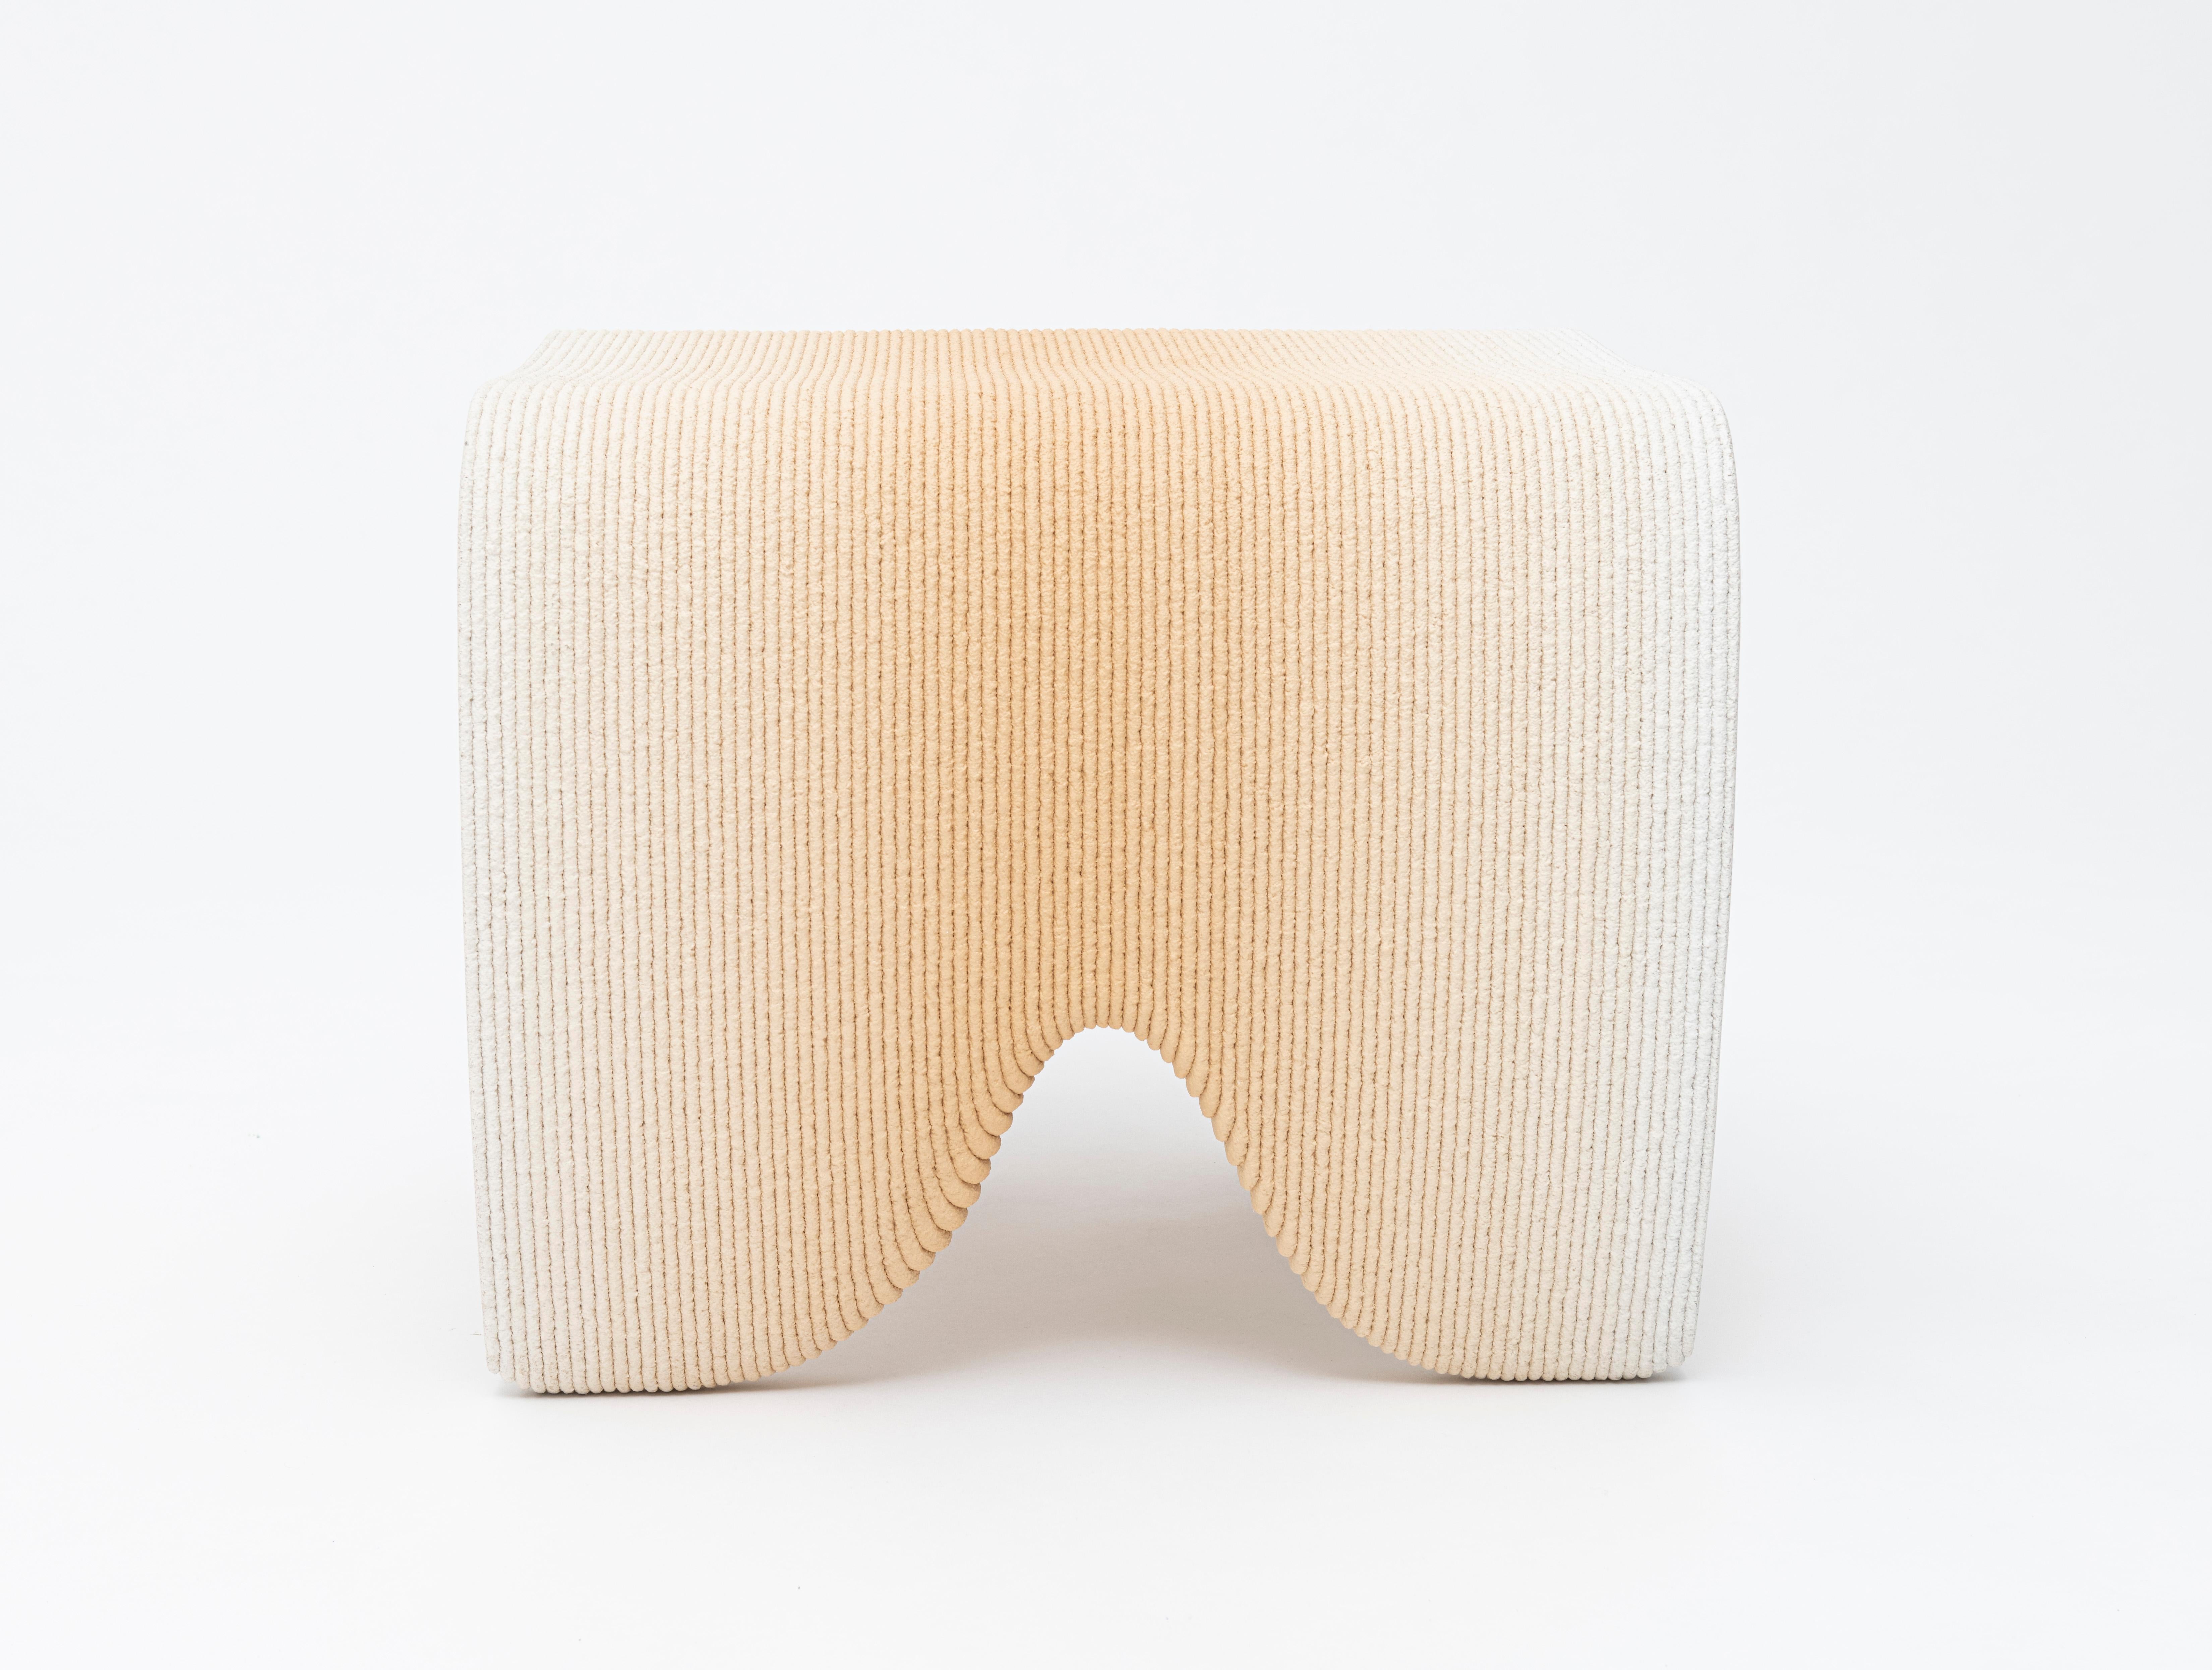 Gradient stool by Philipp Aduatz
Limited Edition of 50
Dimensions: 54 x 56 x 45 cm
Materials: 3D printed concrete dyed, reinforced with steel

Available in red, blue, beige, green and black.

The 3D printed gradient furniture collection is